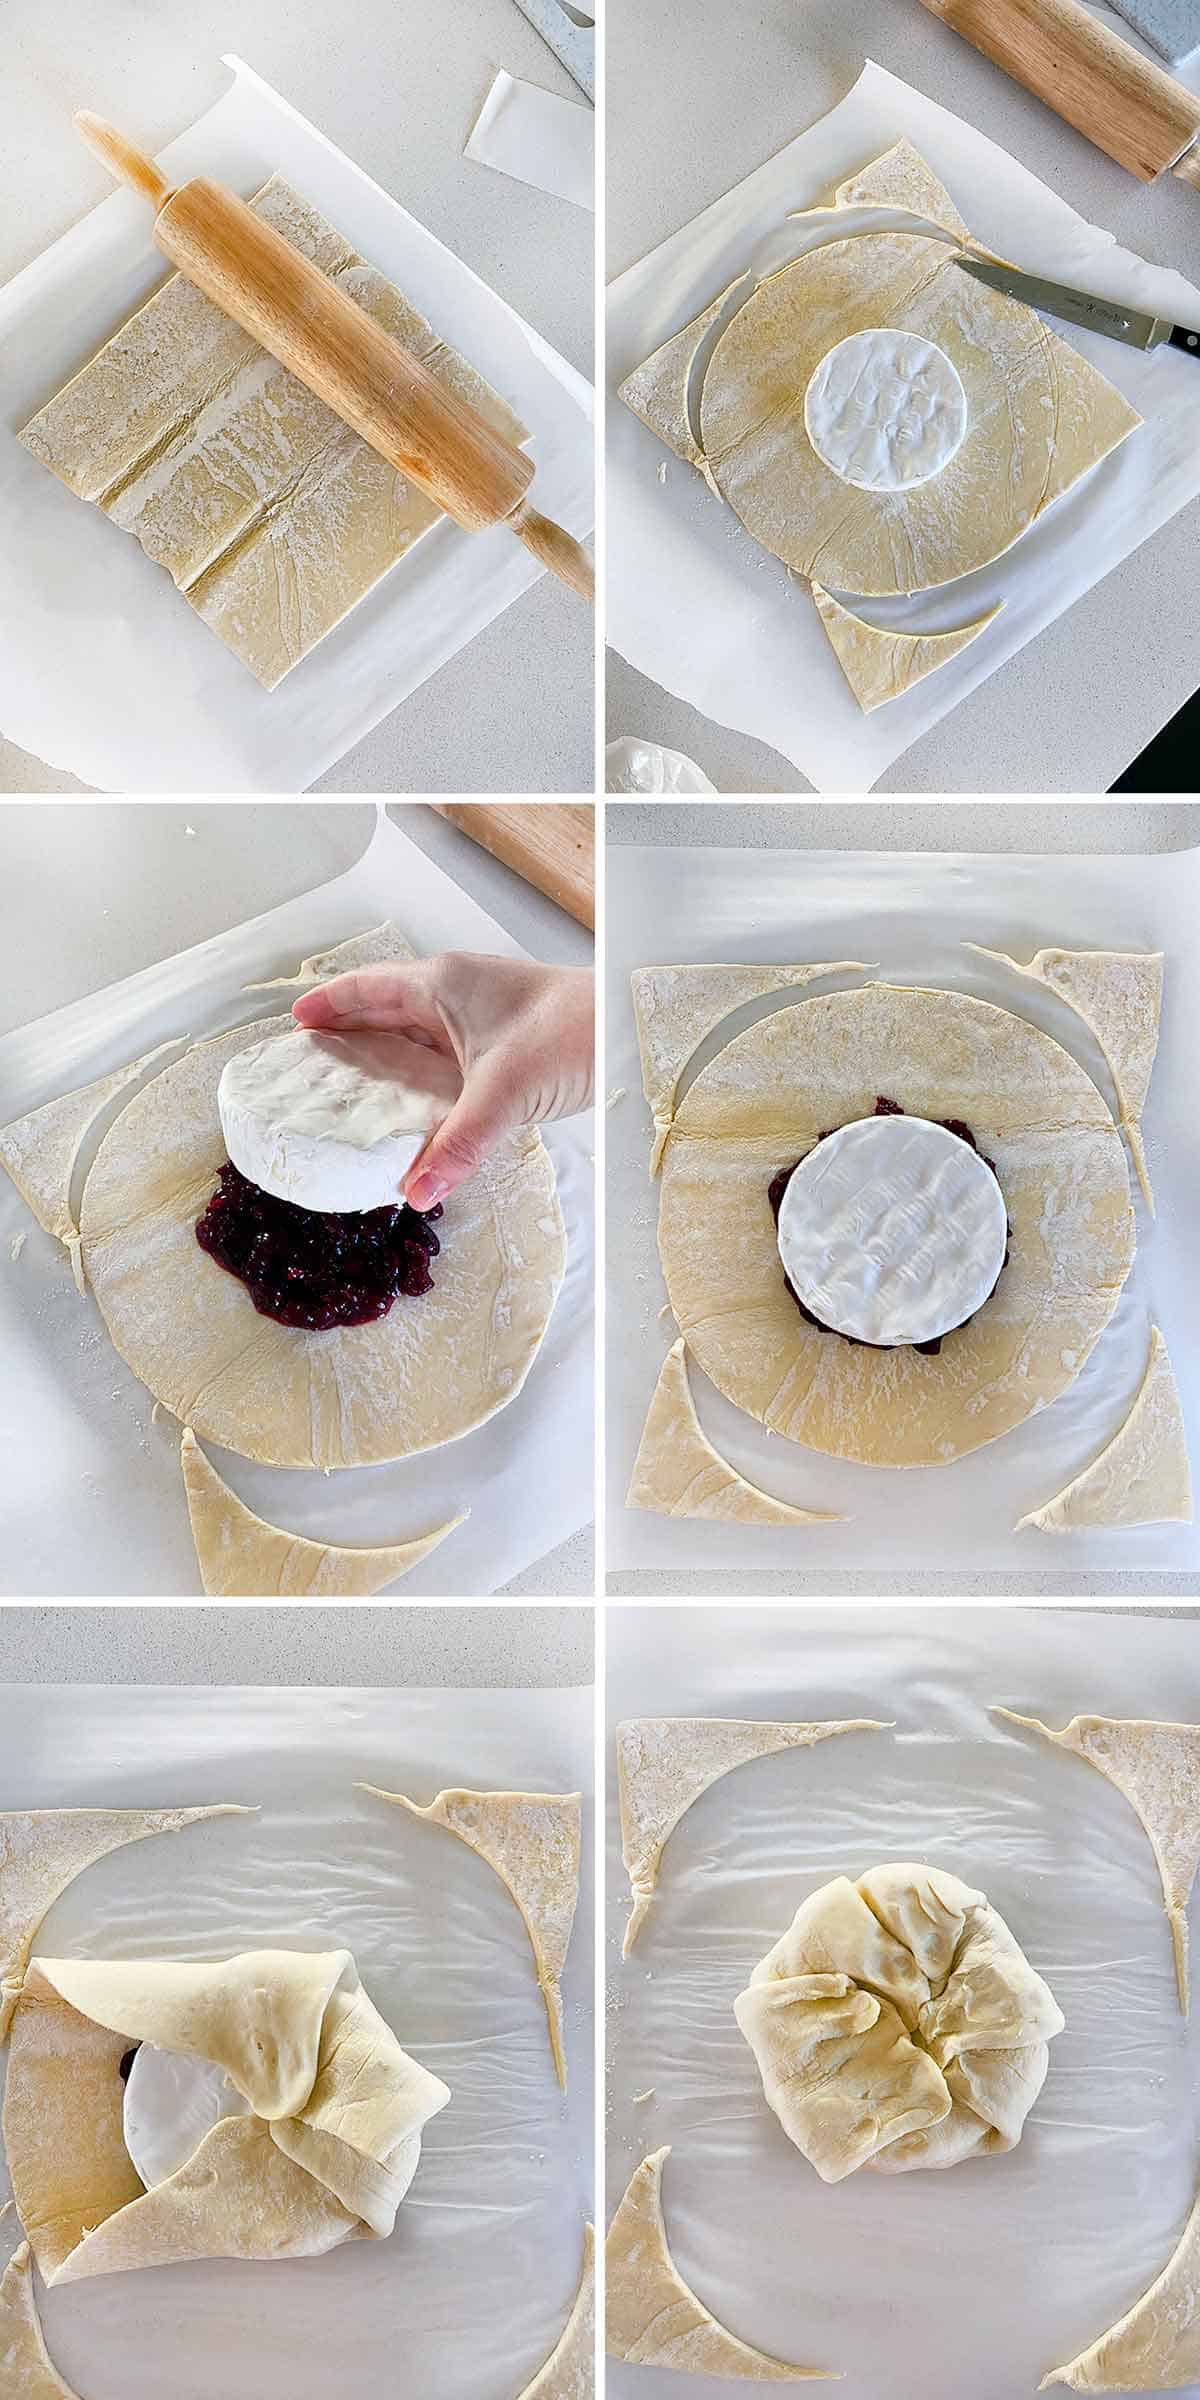 Process collage showing how to assemble a brie en croute with puff pastry.